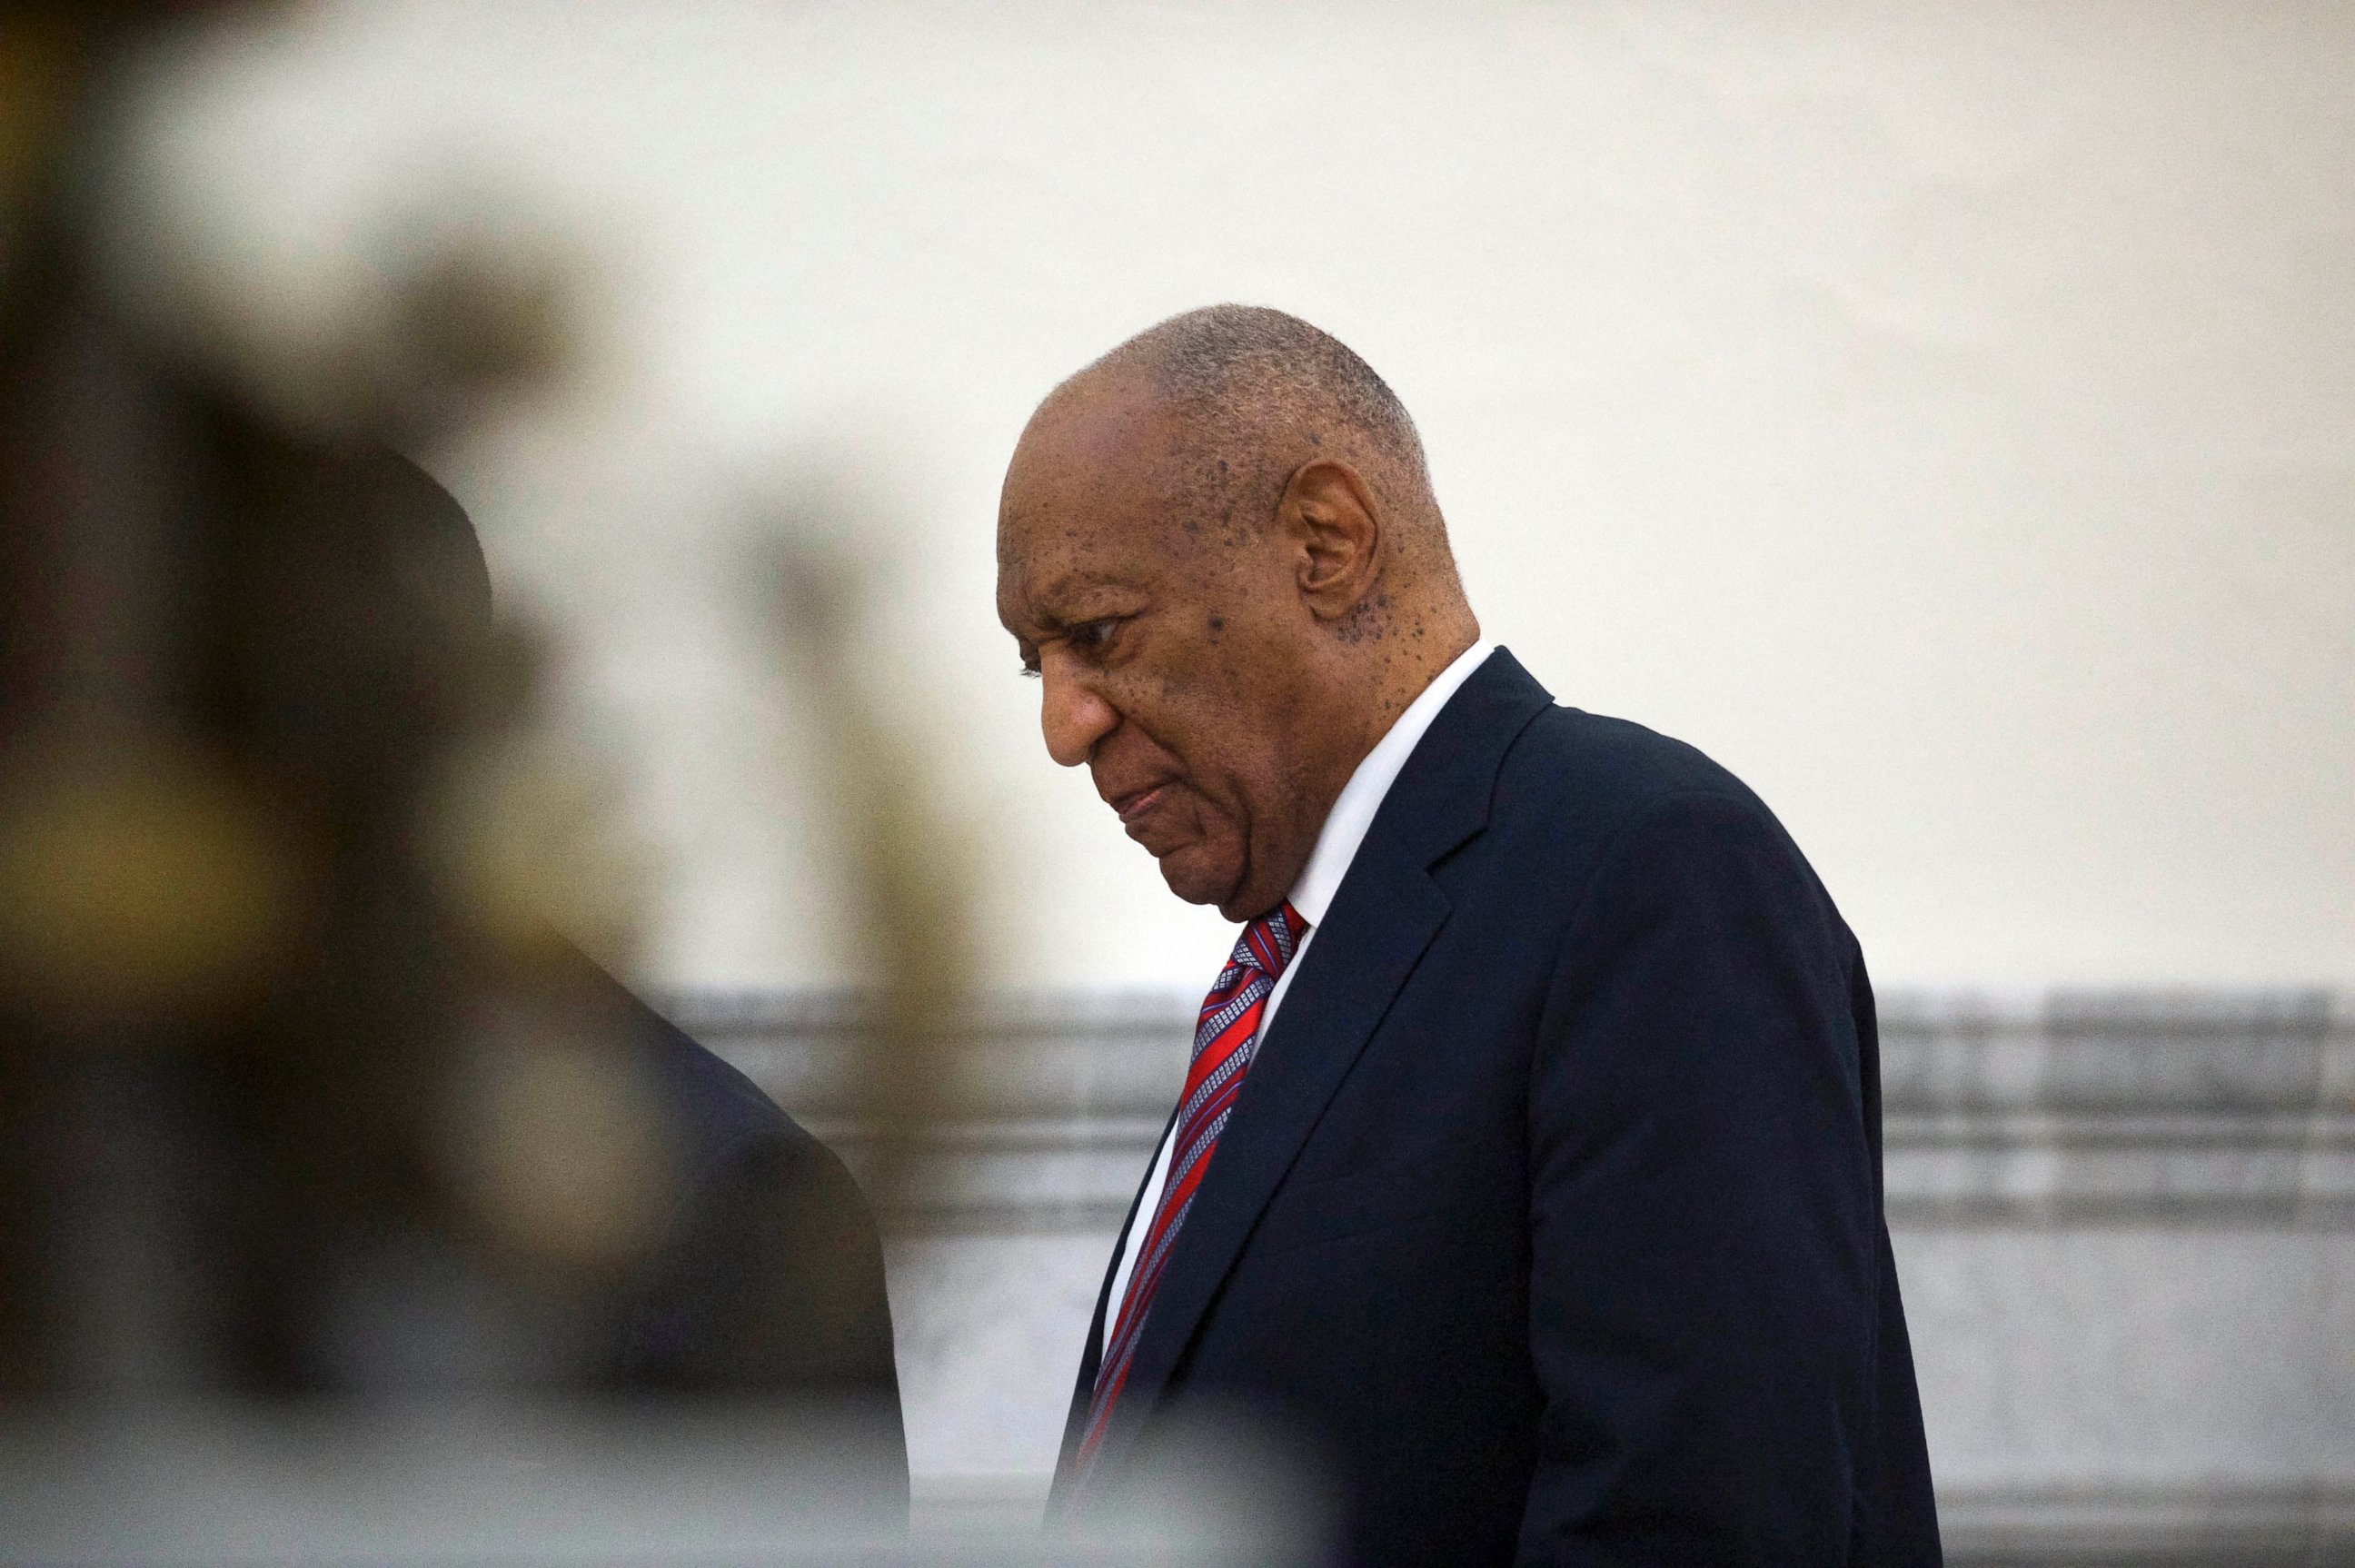 PHOTO: Bill Cosby walks through the Montgomery County Courthouse in Norristown, Pa., June 7, 2017, on the third day of his sexual assault trial.